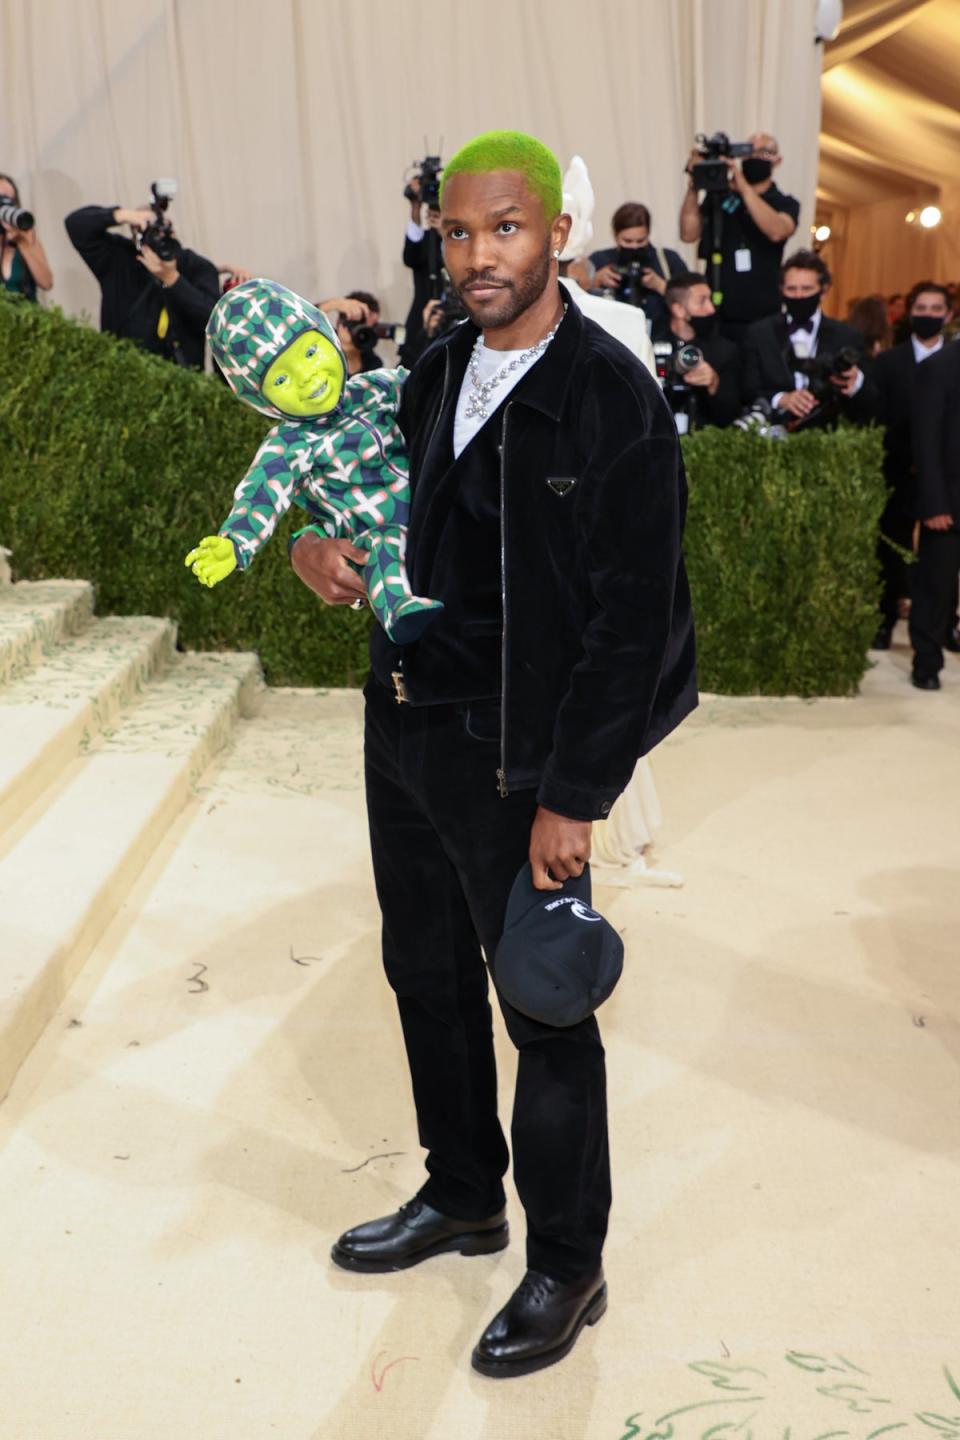 Frank Ocean carried a green alien baby to the 2021 Met Gala (Getty Images for The Met Museum/)